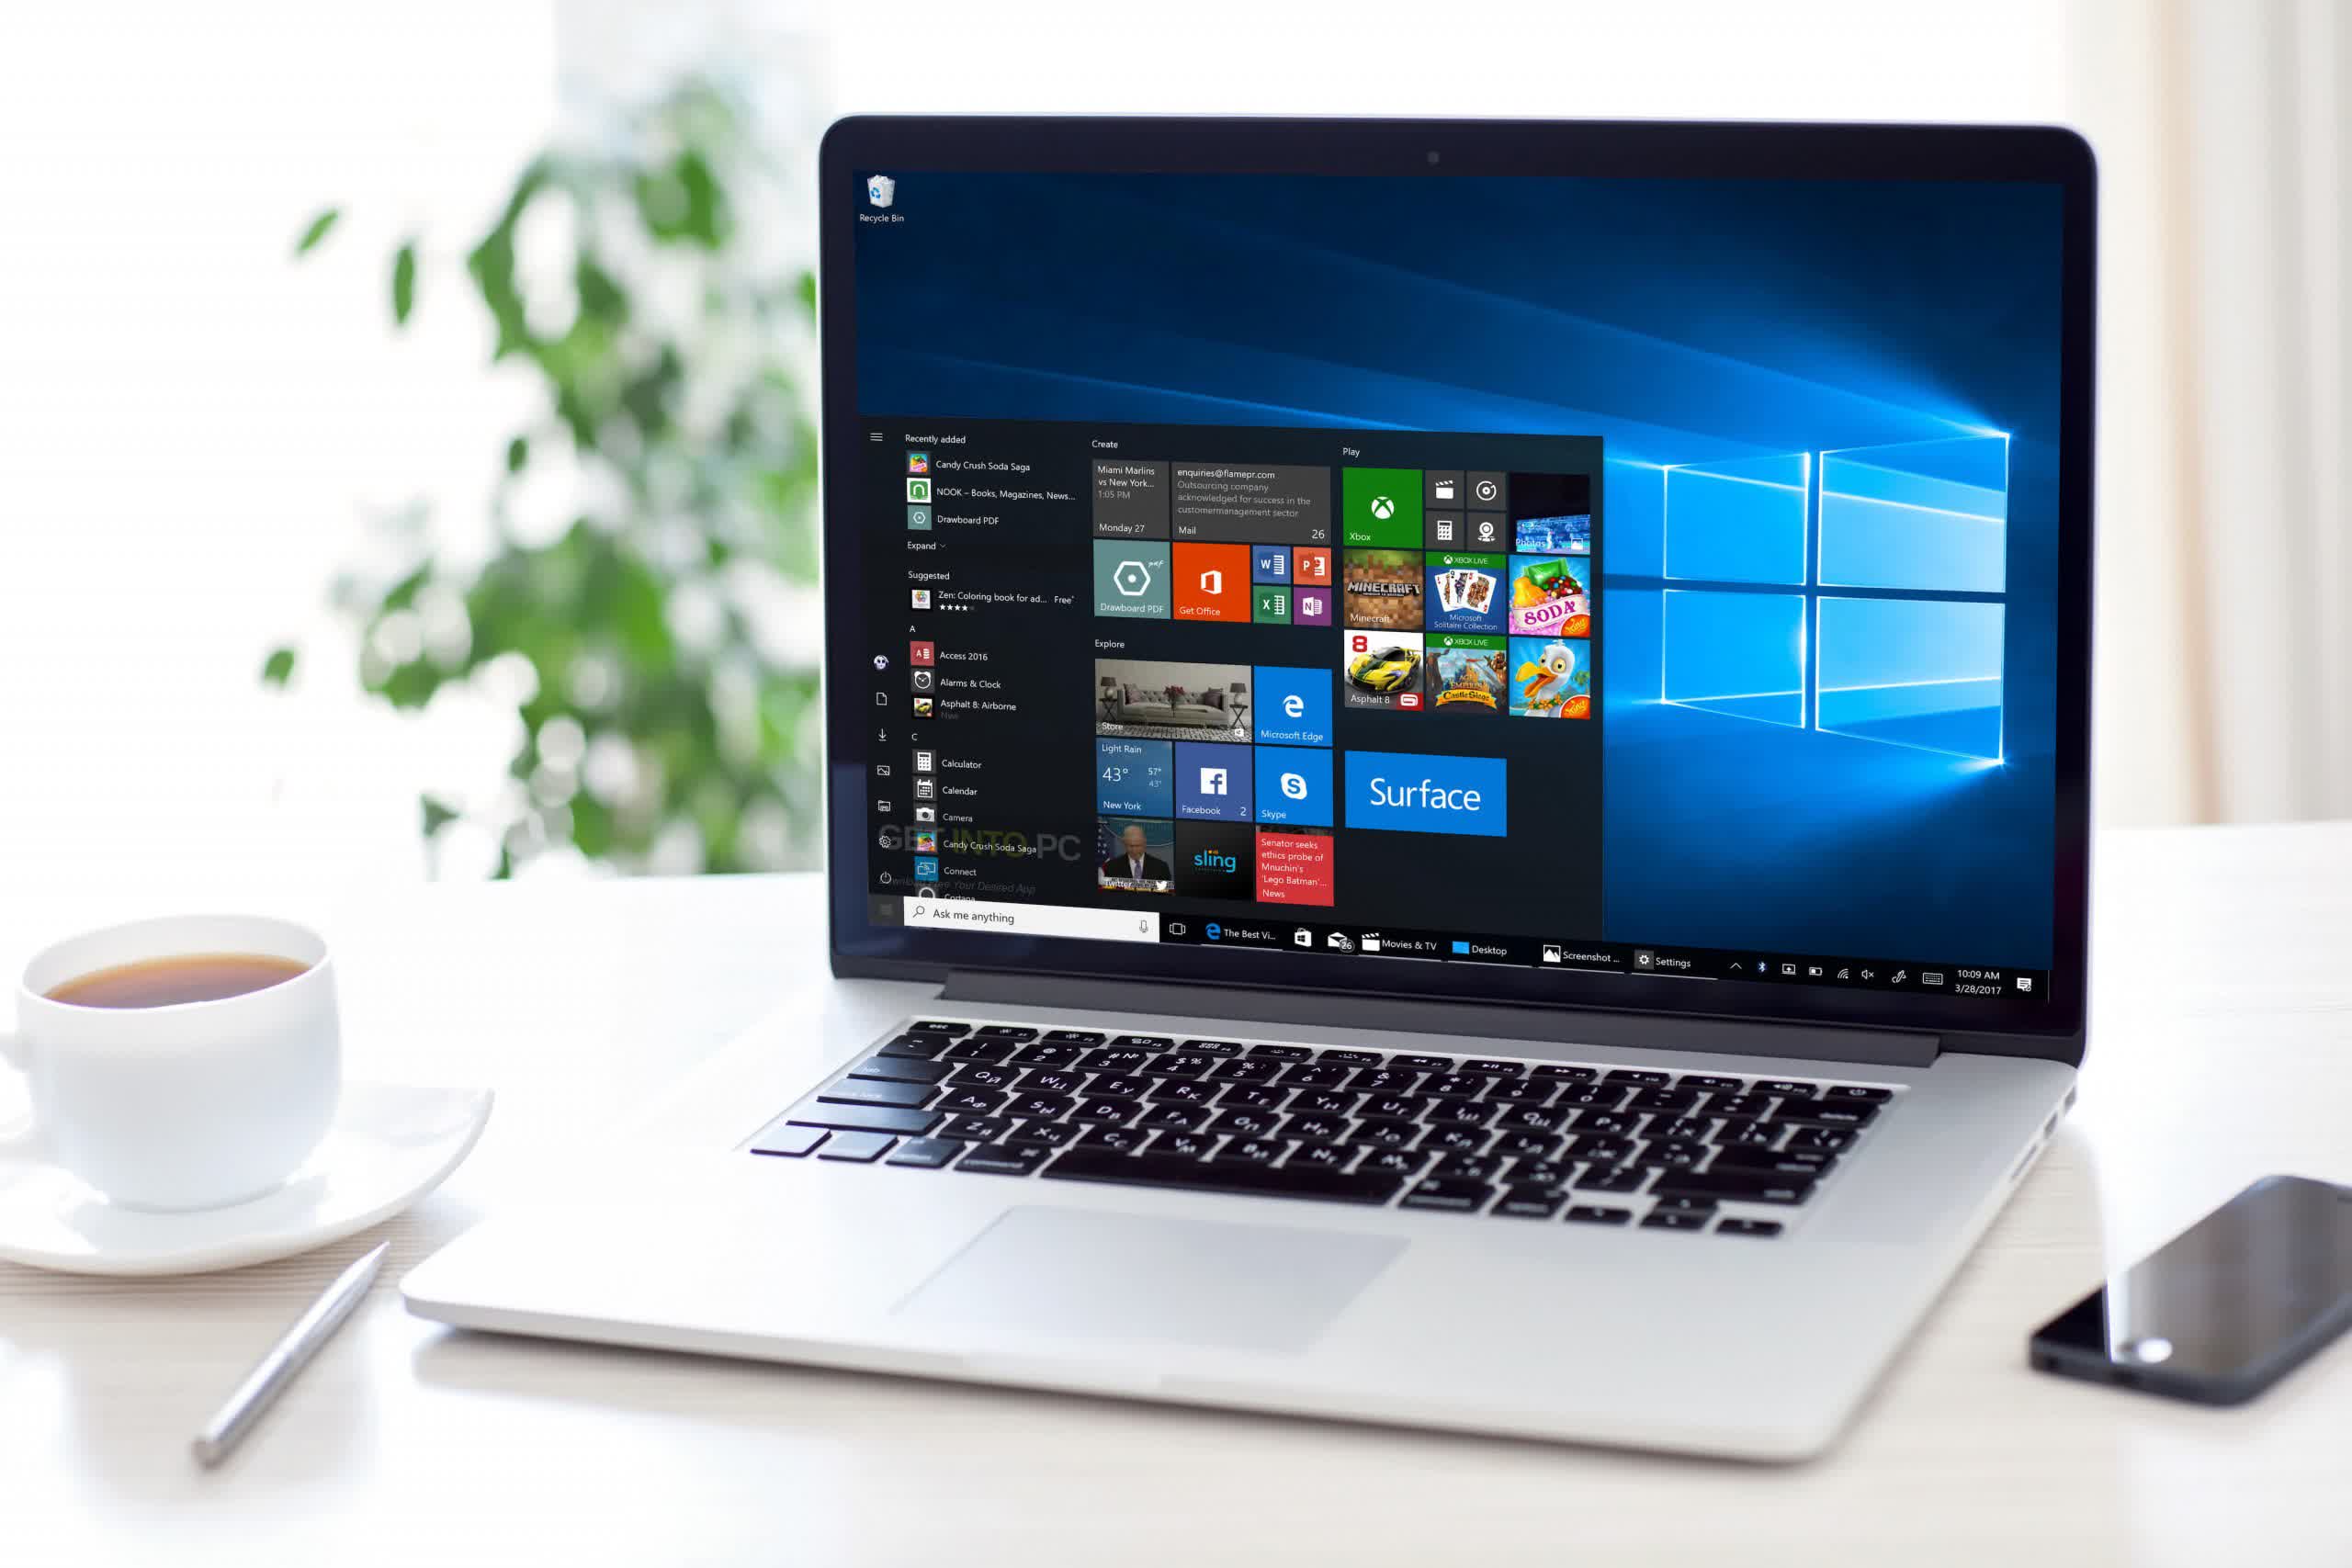 'Windows 10 on Arm' runs better on an M1 Mac than it does on the Surface Pro X